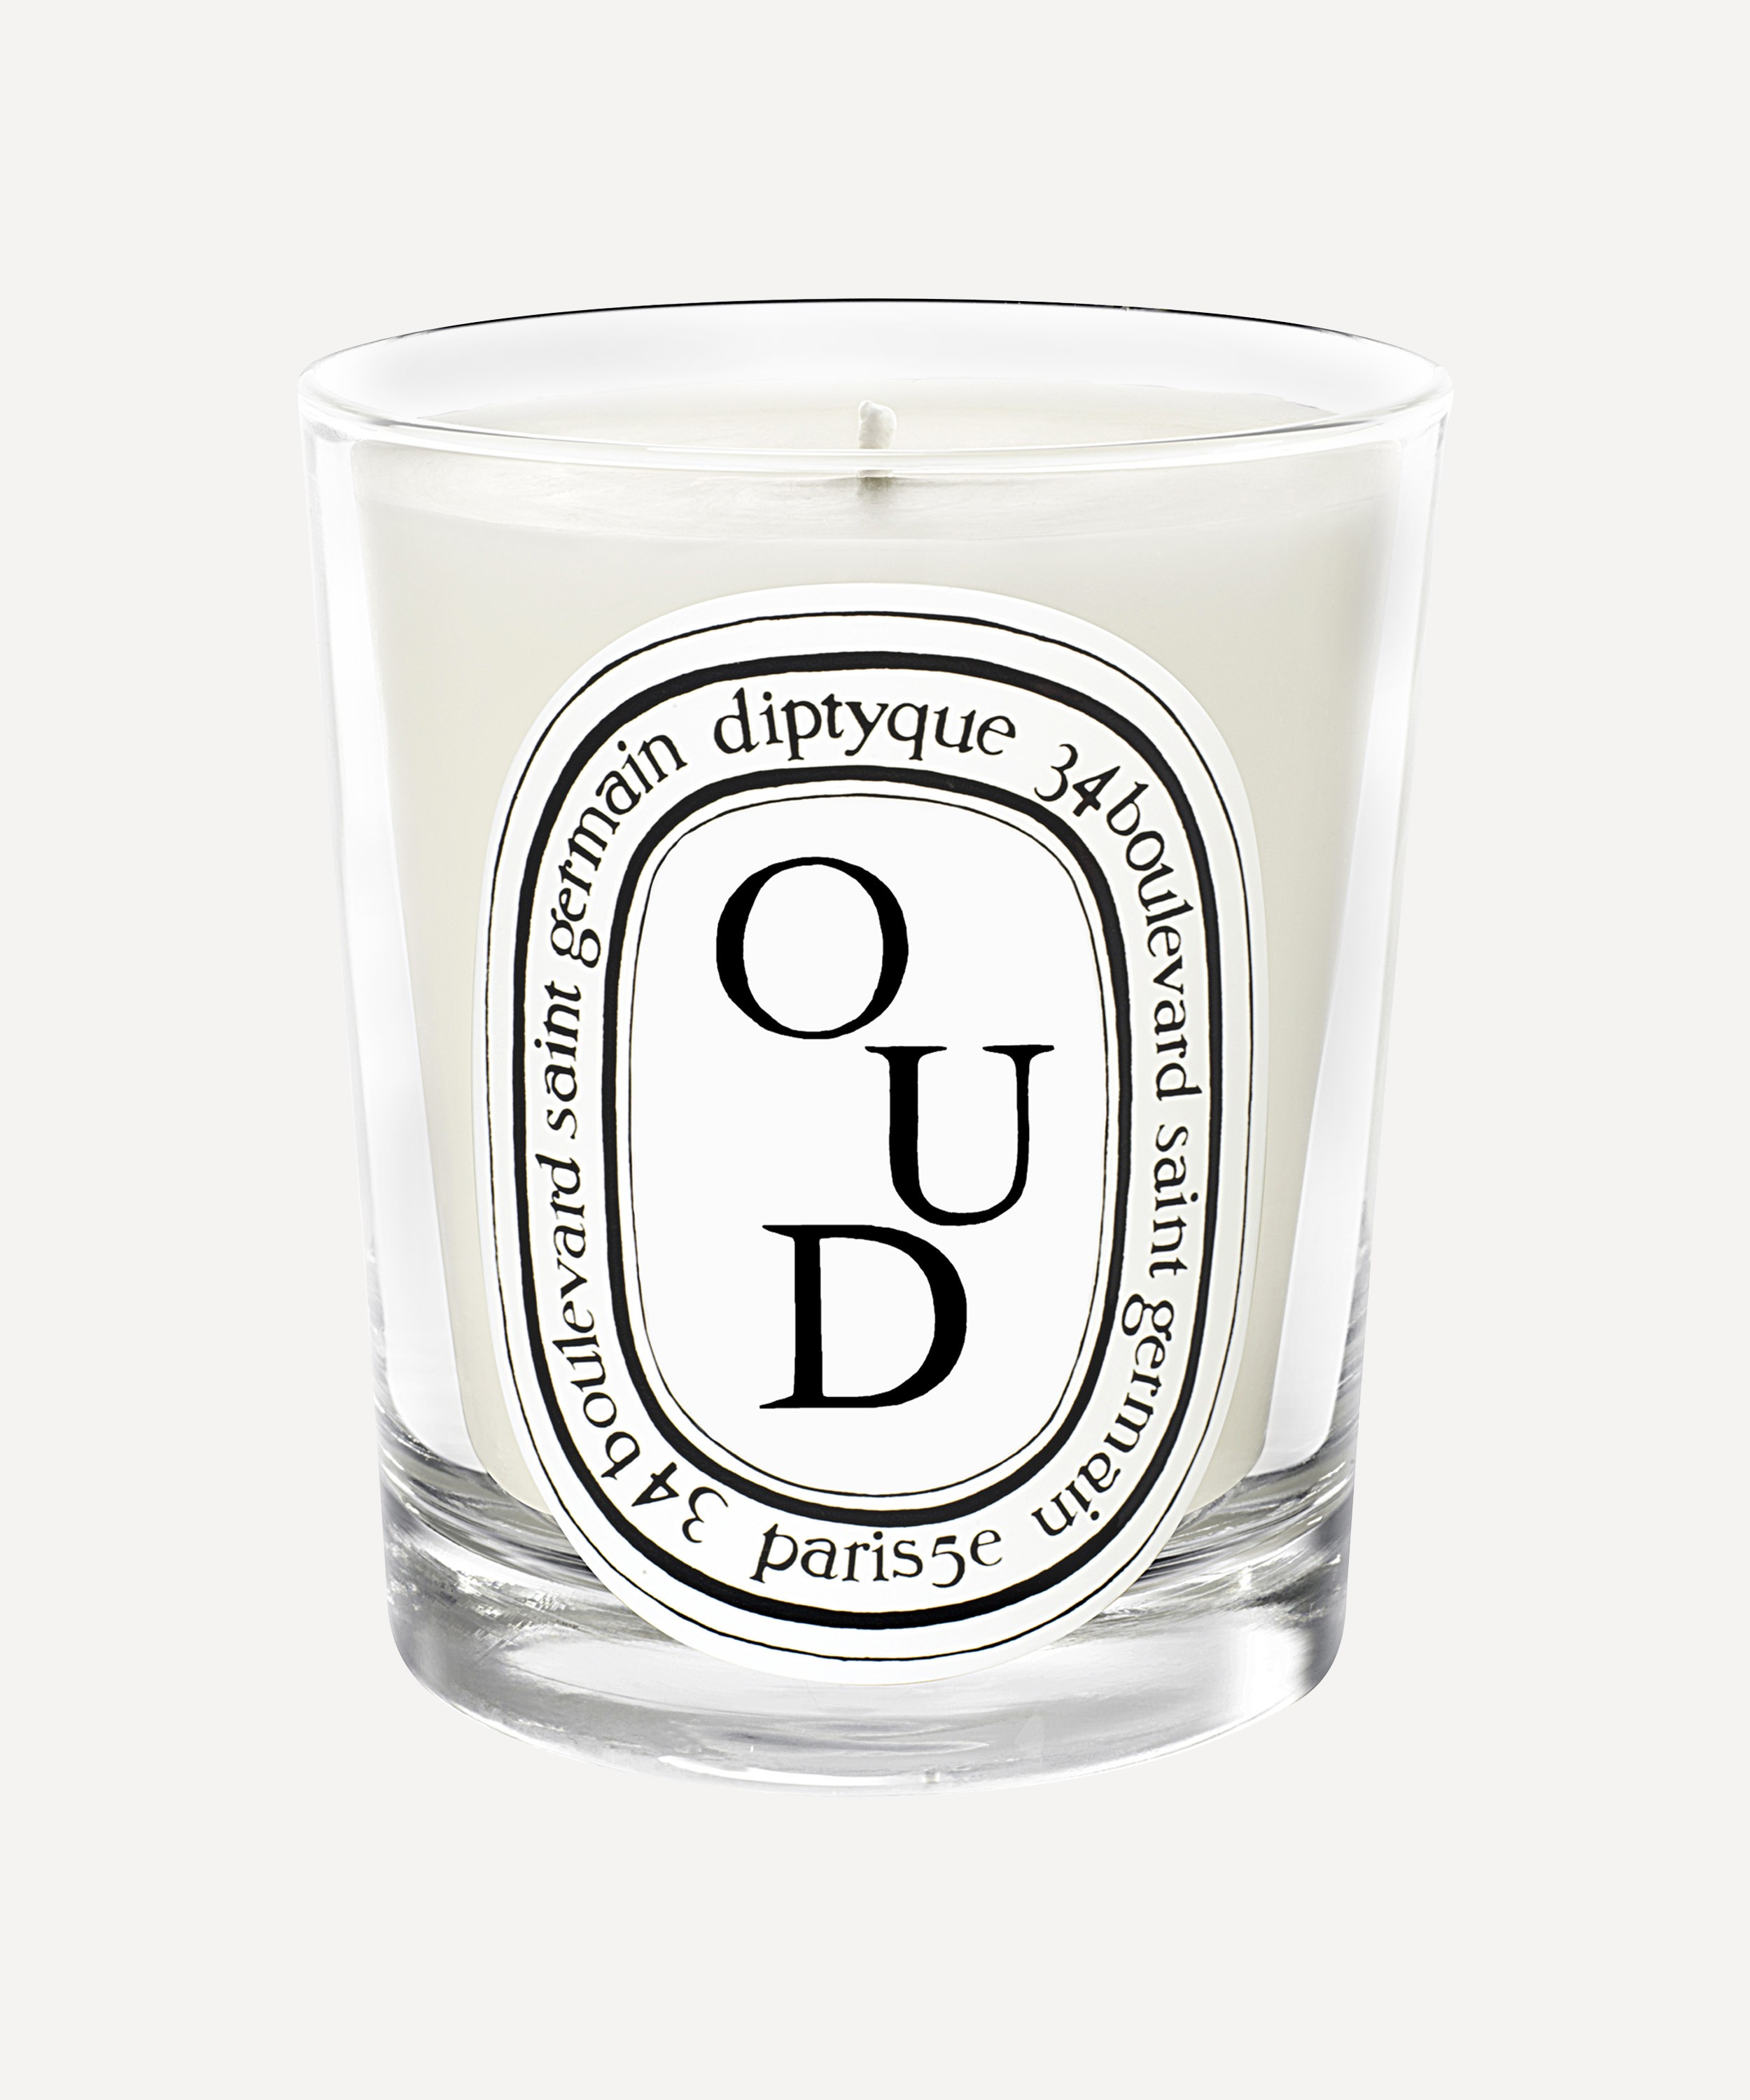 Diptyque Oud Candle 190g